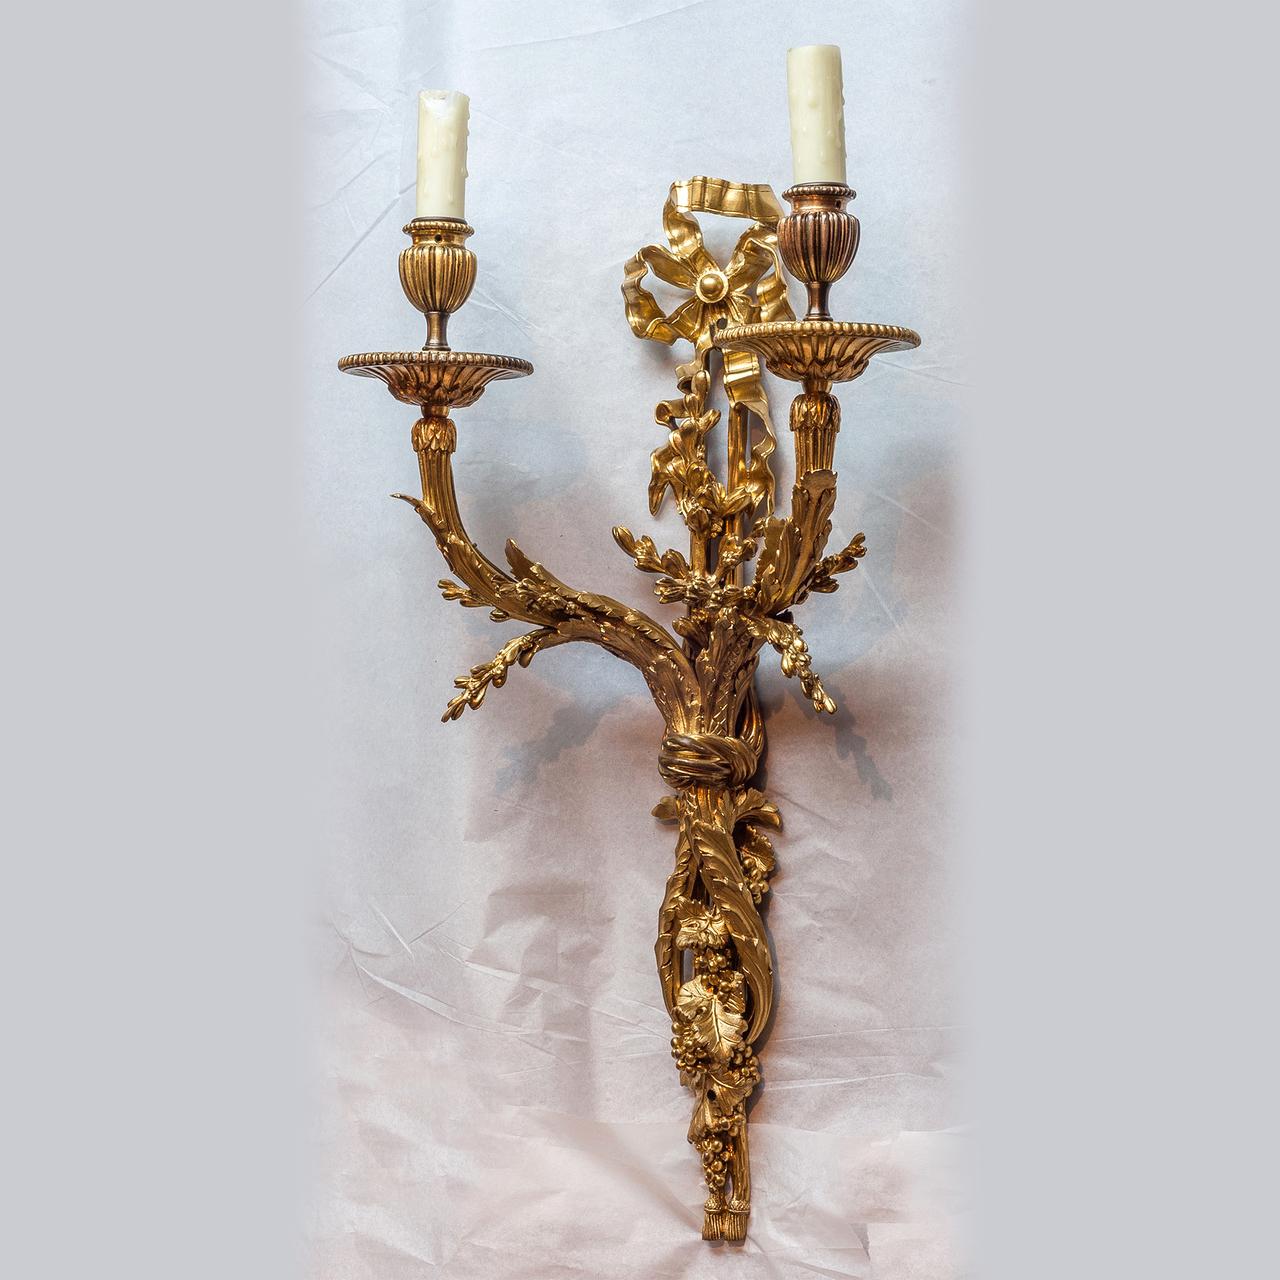 A very fine quality pair of French two-arms ormolu wall light sconces

Origin: French
Date: 19th century
Dimension: 21 1/2 x 11 3/4 x 7 inches.